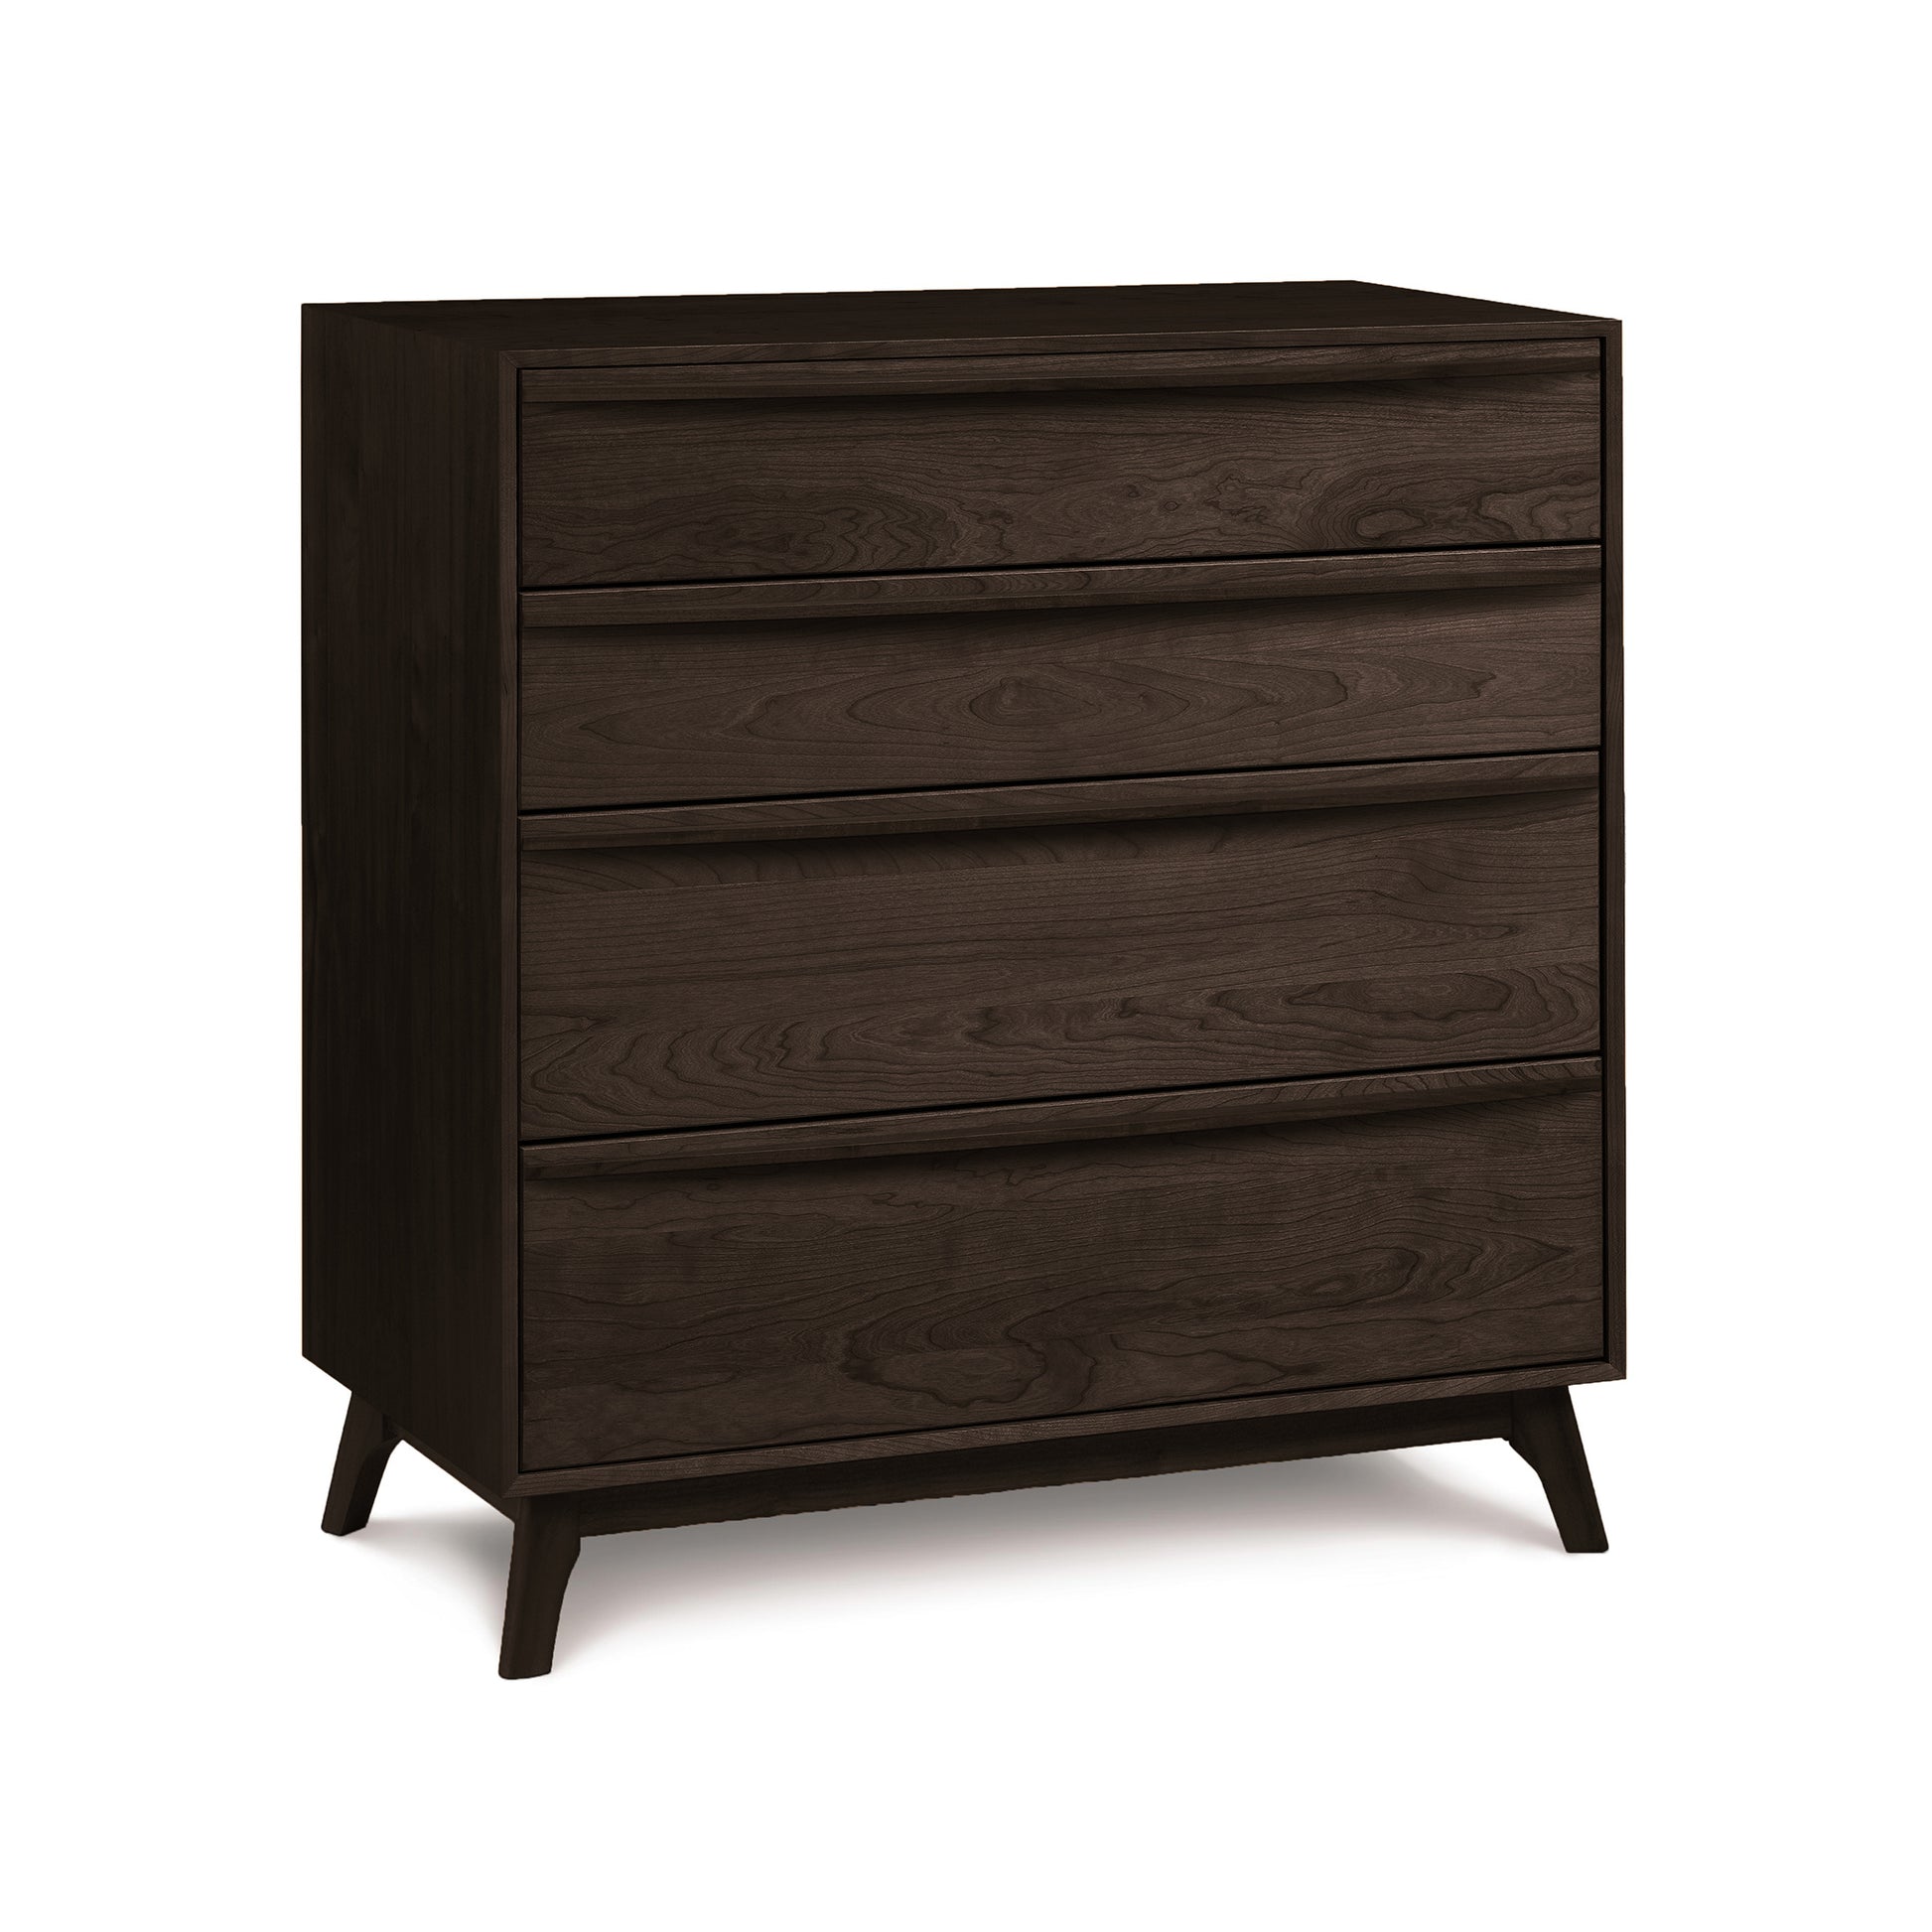 A modern Copeland Furniture Catalina 4-Drawer Chest crafted from sustainably harvested wood on angled legs.